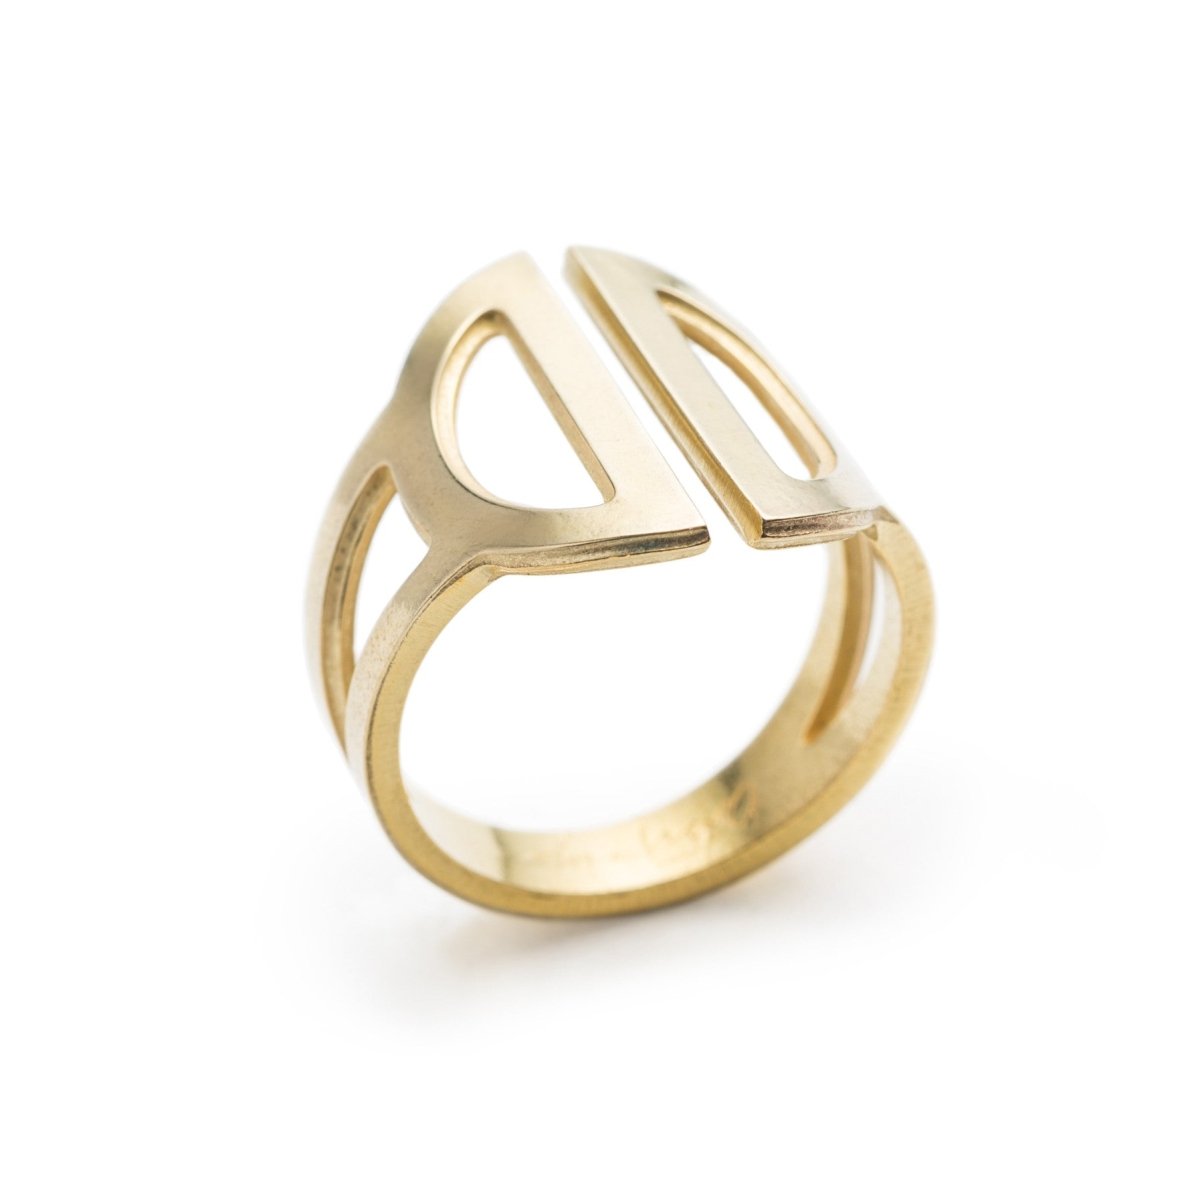 Wide, adjustable, polished brass ring, featuring two triangular cutouts on the band and a pair of semicircle cutouts as the focal point. Hand-crafted in Portland, Oregon. 